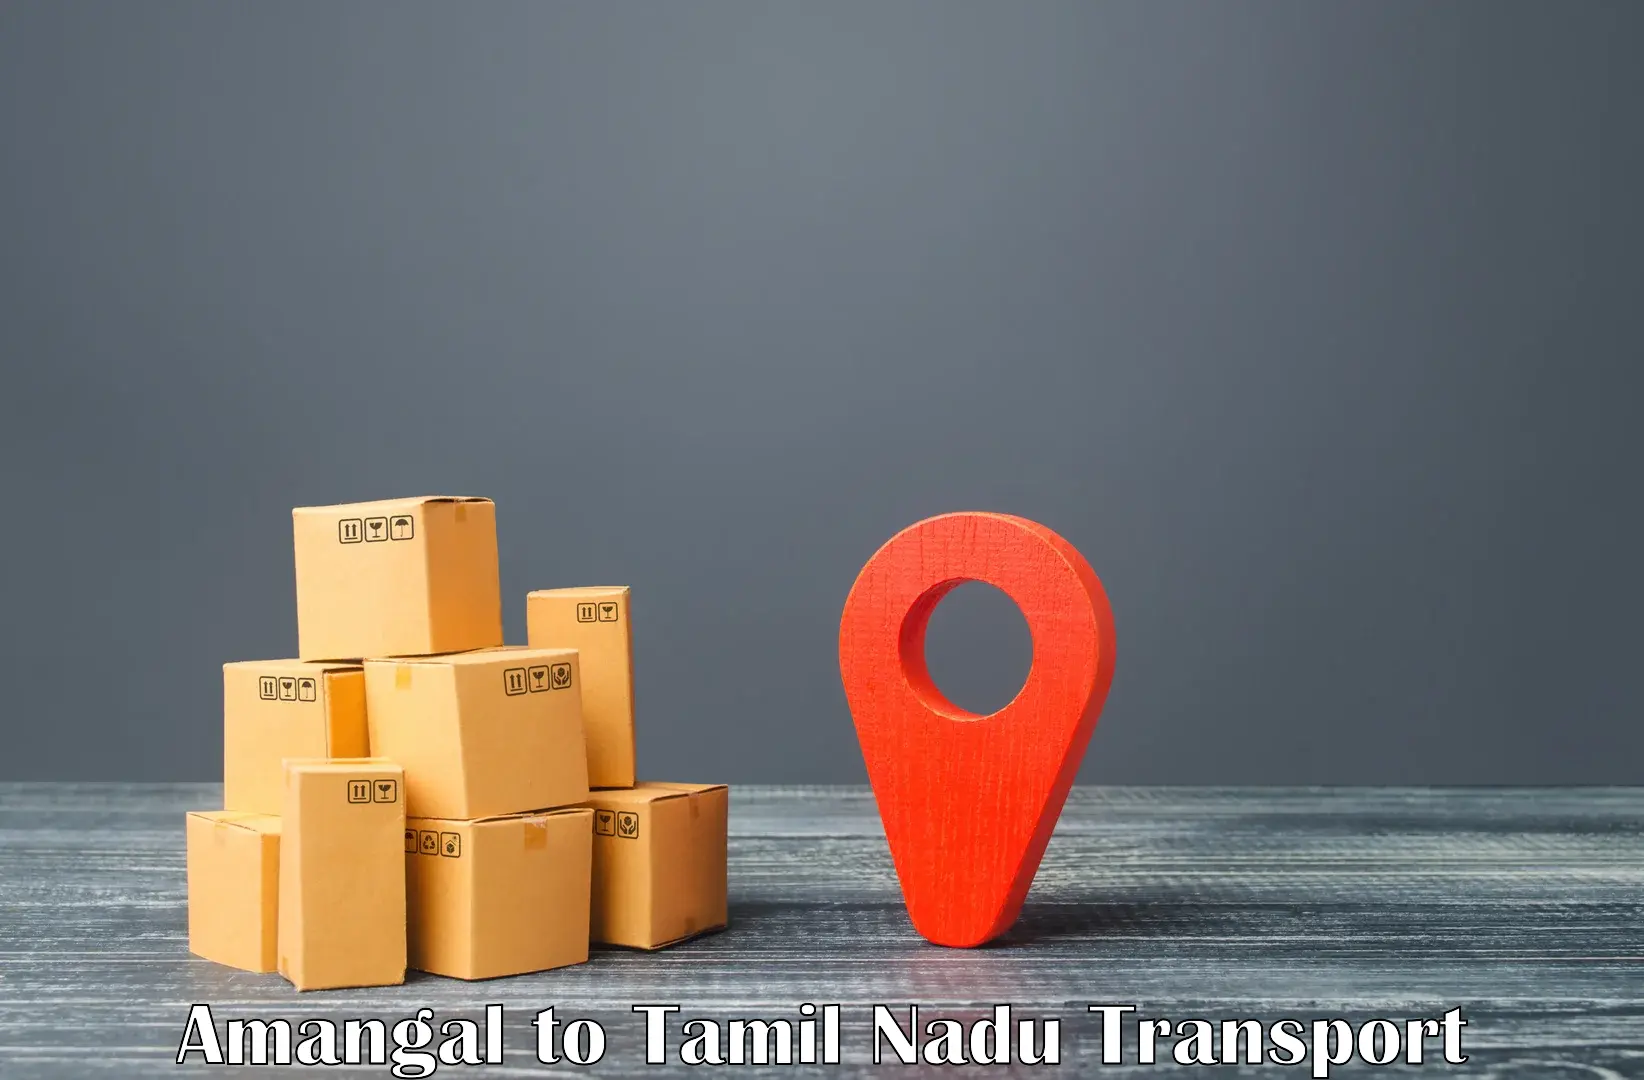 Delivery service Amangal to Chennai Port